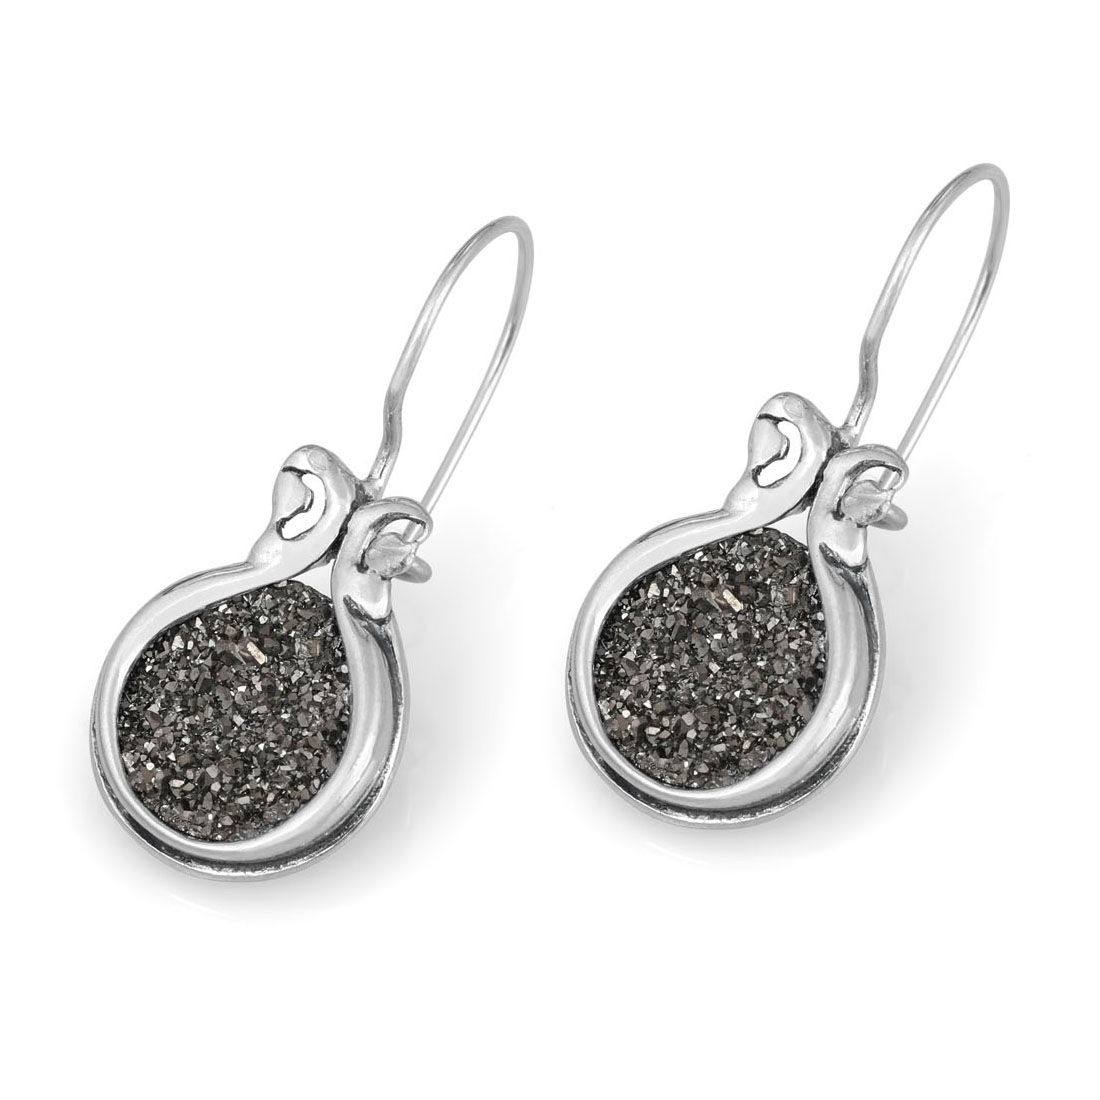 Moriah Jewelry Abstract Pomegranate Druzy Quartz Sterling Silver Drop Earrings - 1